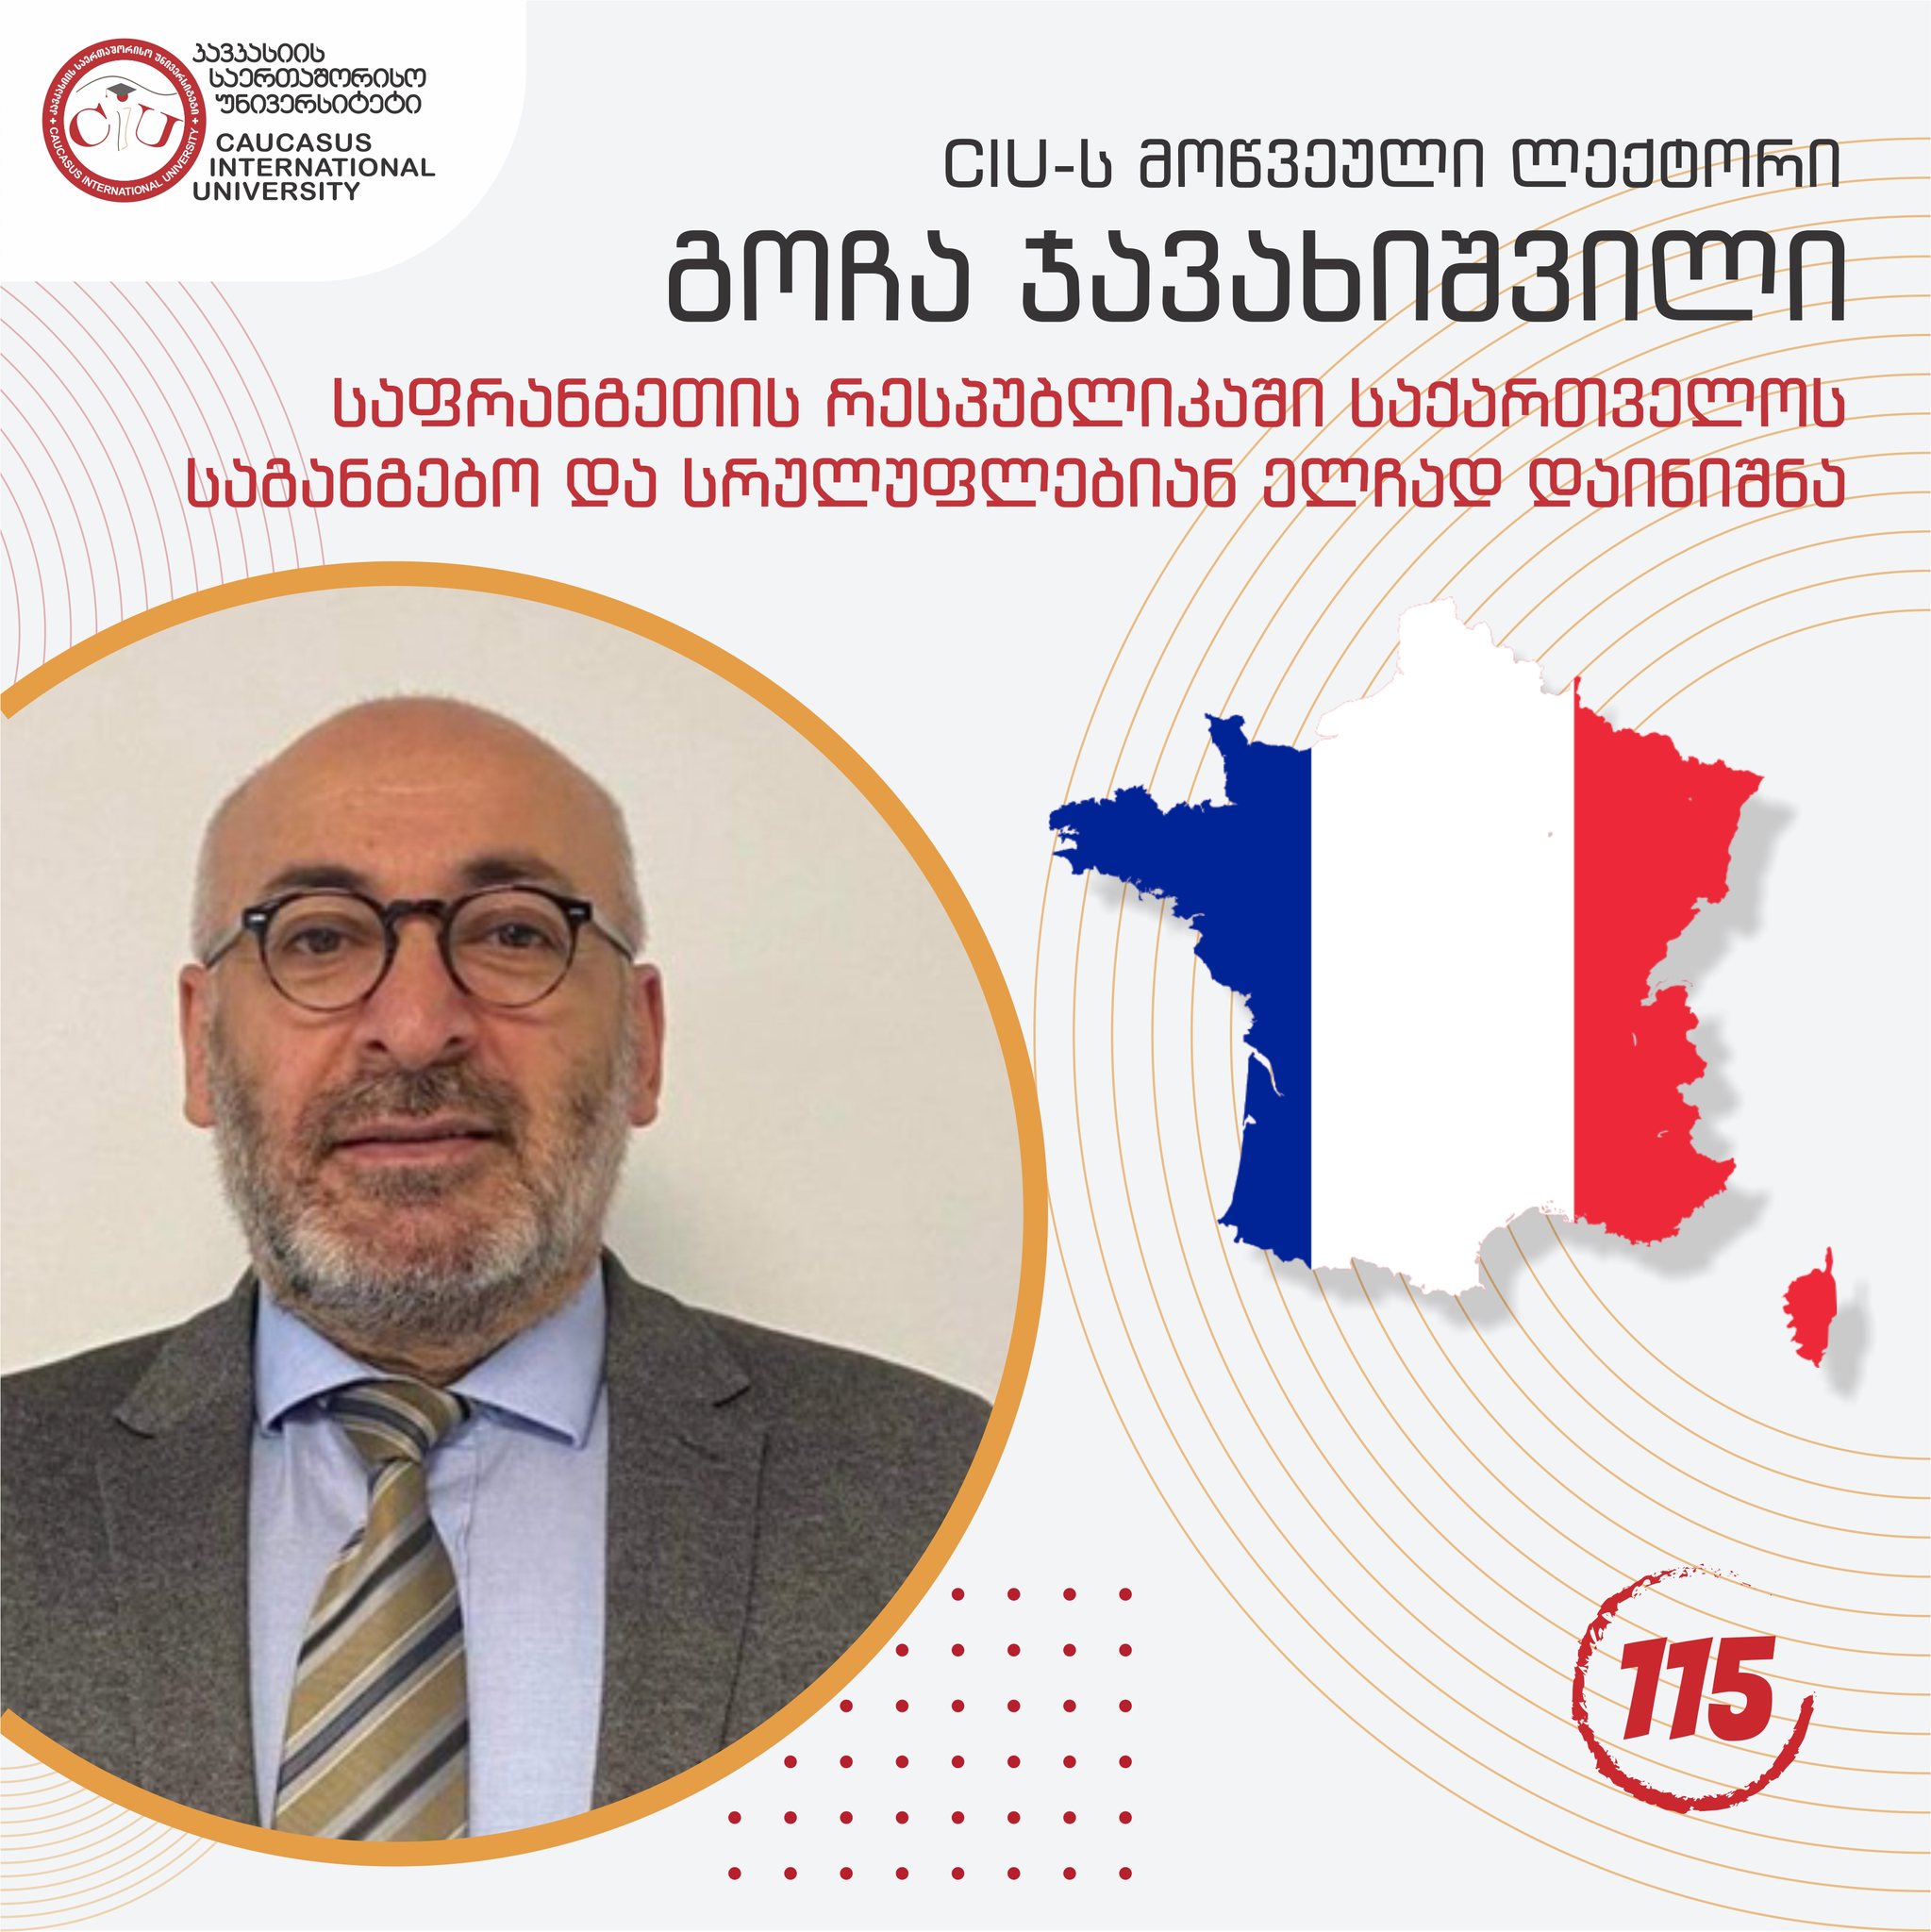 Gocha Javakhishvili, PhD Student in Political Science at CIU, Was Appointed as the Ambassador Extraordinary and Plenipotentiary of Georgia to the Republic of France